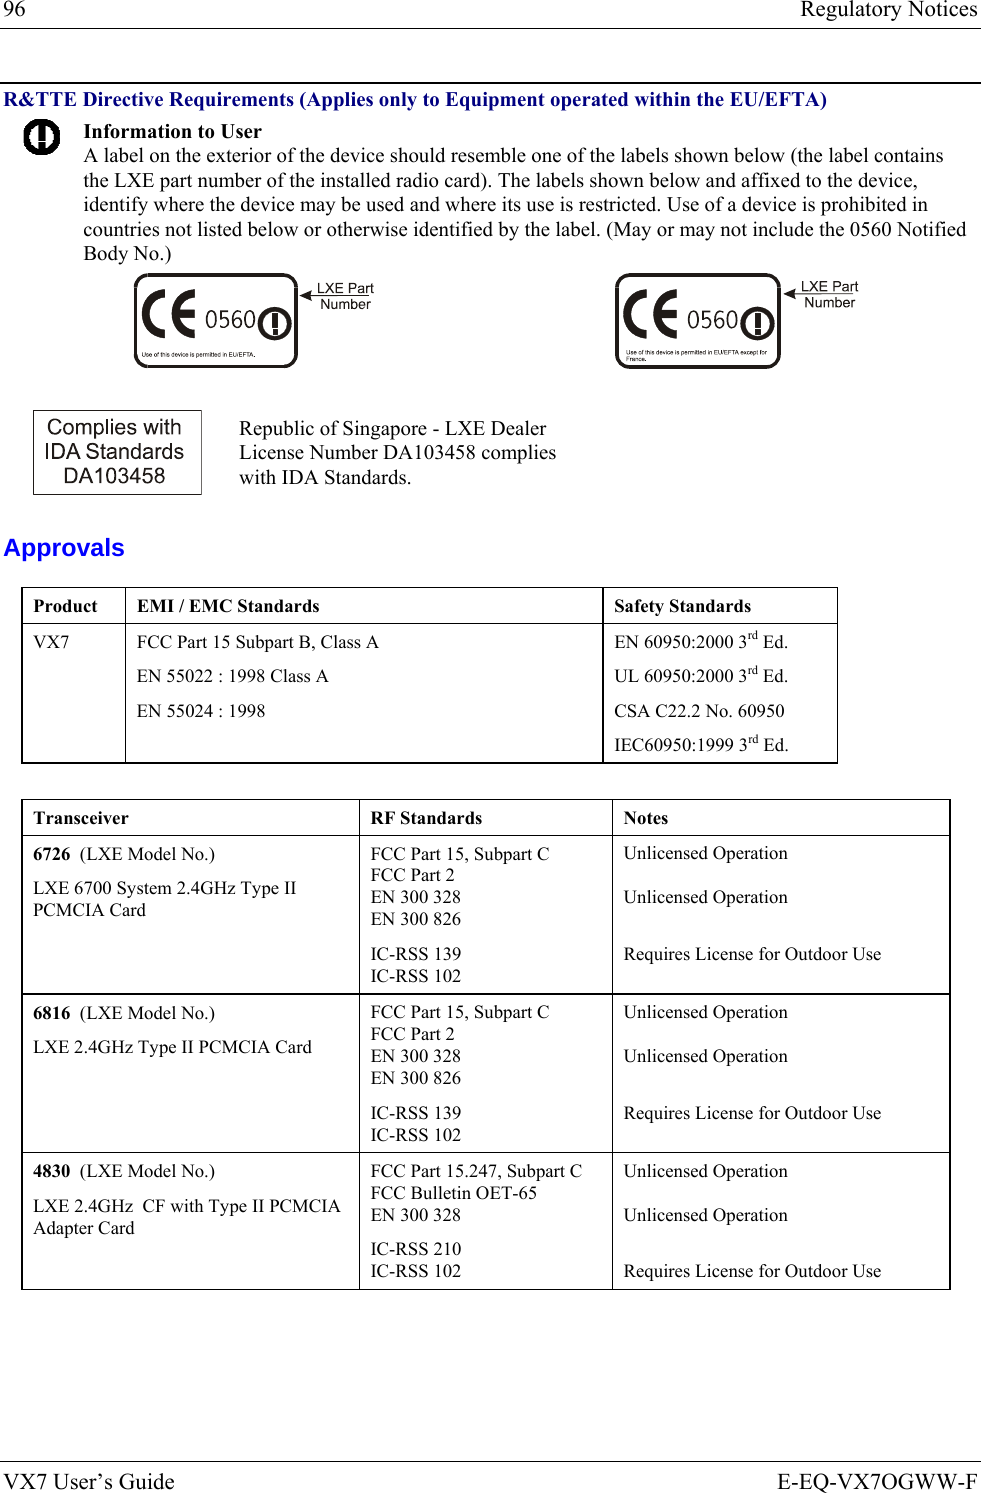 96  Regulatory Notices VX7 User’s Guide  E-EQ-VX7OGWW-F R&amp;TTE Directive Requirements (Applies only to Equipment operated within the EU/EFTA)  Information to User A label on the exterior of the device should resemble one of the labels shown below (the label contains the LXE part number of the installed radio card). The labels shown below and affixed to the device, identify where the device may be used and where its use is restricted. Use of a device is prohibited in countries not listed below or otherwise identified by the label. (May or may not include the 0560 Notified Body No.)     Republic of Singapore - LXE Dealer License Number DA103458 complies with IDA Standards. Approvals Product  EMI / EMC Standards  Safety Standards VX7   FCC Part 15 Subpart B, Class A EN 55022 : 1998 Class A EN 55024 : 1998 EN 60950:2000 3rd Ed. UL 60950:2000 3rd Ed. CSA C22.2 No. 60950 IEC60950:1999 3rd Ed.  Transceiver RF Standards Notes 6726  (LXE Model No.) LXE 6700 System 2.4GHz Type II PCMCIA Card FCC Part 15, Subpart C FCC Part 2 EN 300 328 EN 300 826 IC-RSS 139 IC-RSS 102 Unlicensed Operation  Unlicensed Operation  Requires License for Outdoor Use 6816  (LXE Model No.) LXE 2.4GHz Type II PCMCIA Card FCC Part 15, Subpart C FCC Part 2 EN 300 328 EN 300 826 IC-RSS 139 IC-RSS 102 Unlicensed Operation  Unlicensed Operation  Requires License for Outdoor Use 4830  (LXE Model No.) LXE 2.4GHz  CF with Type II PCMCIA Adapter Card FCC Part 15.247, Subpart C FCC Bulletin OET-65 EN 300 328 IC-RSS 210 IC-RSS 102 Unlicensed Operation  Unlicensed Operation  Requires License for Outdoor Use 